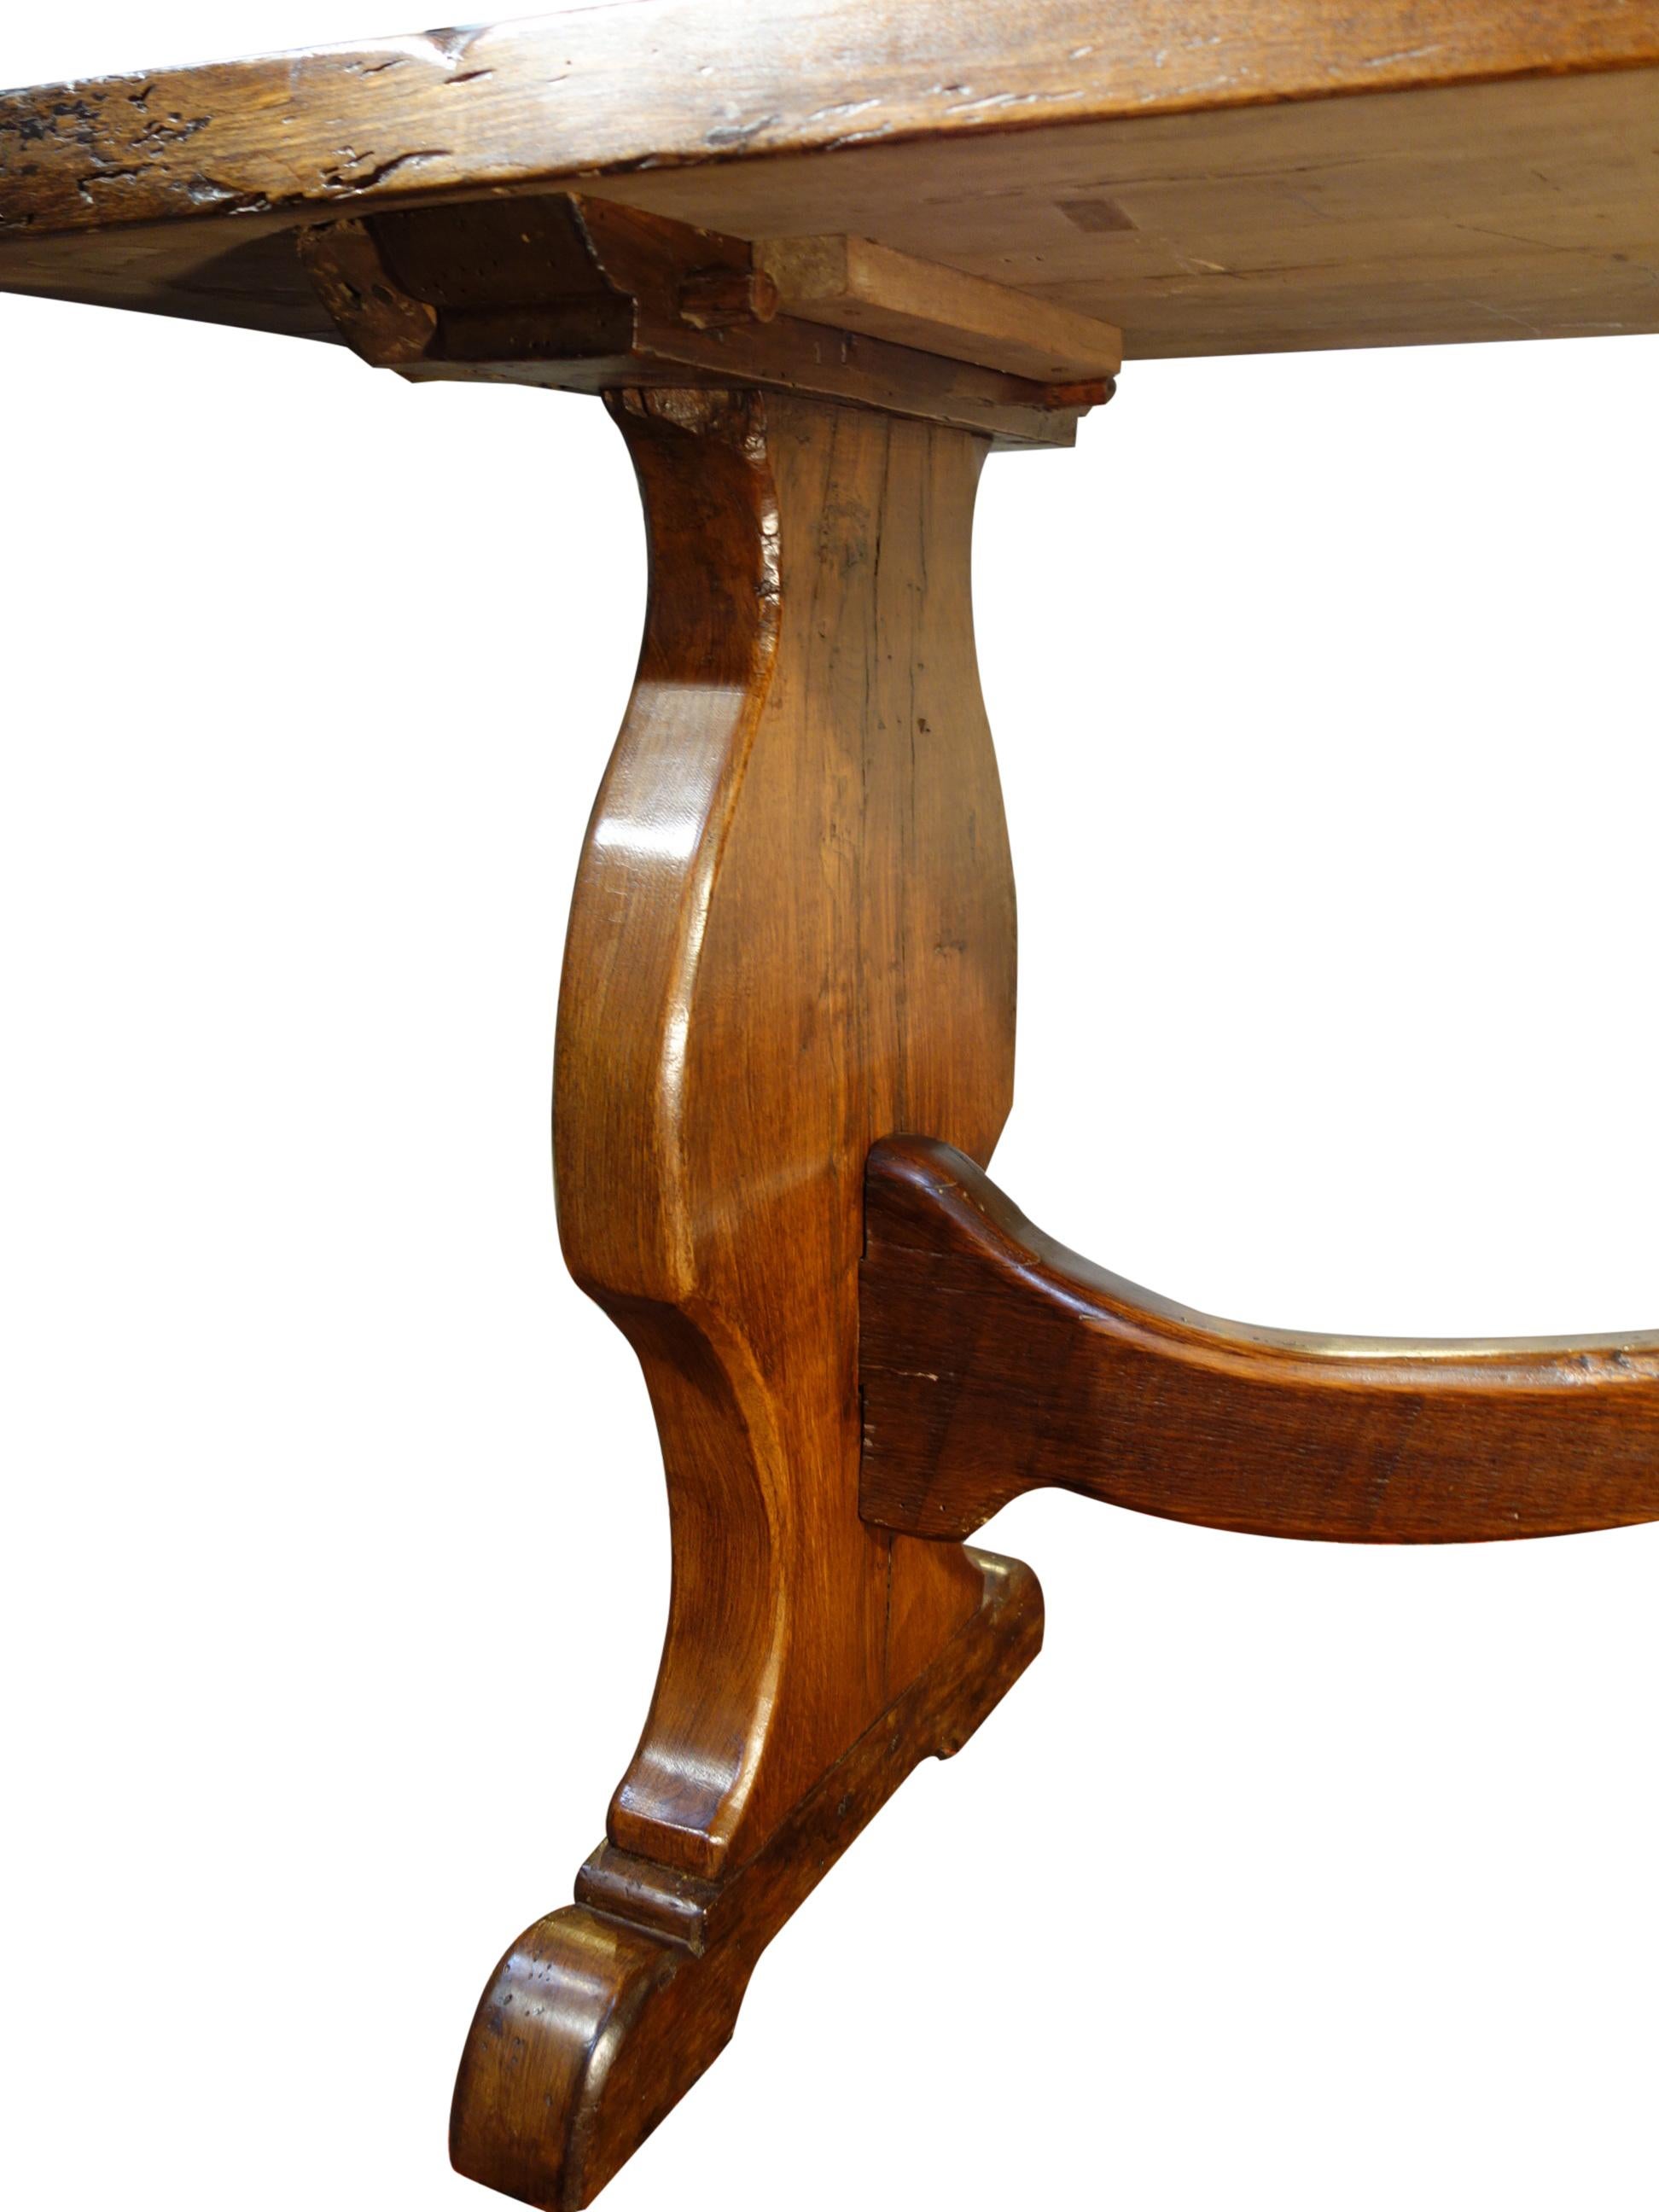 Hand-Crafted 19th Century Italian Walnut Refectory Table with Carved Crosspiece Circa 1840